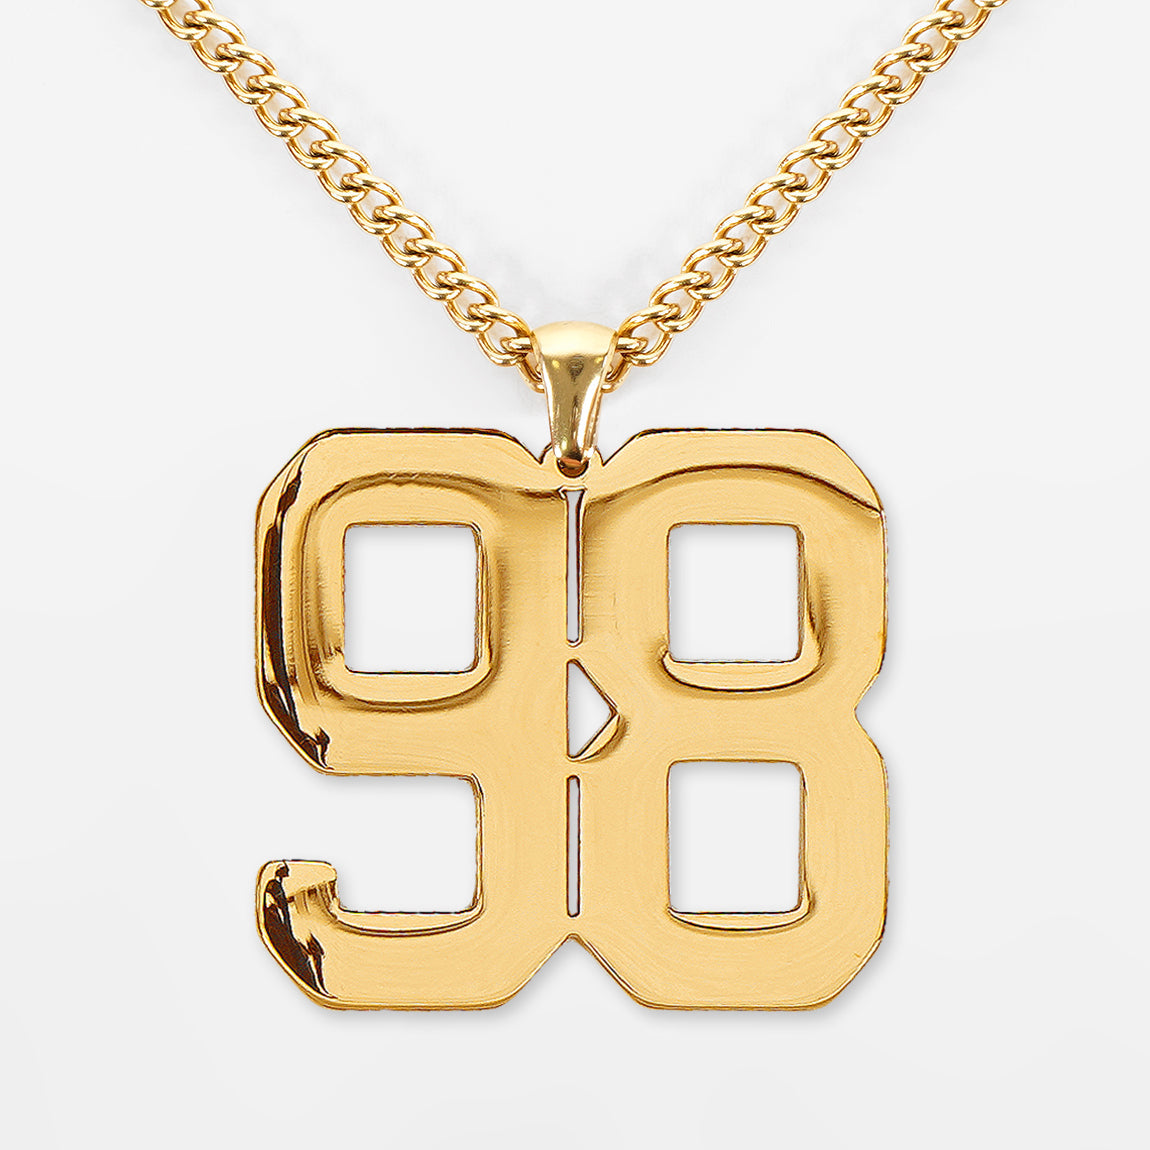 98 Number Pendant with Chain Kids Necklace - Gold Plated Stainless Steel